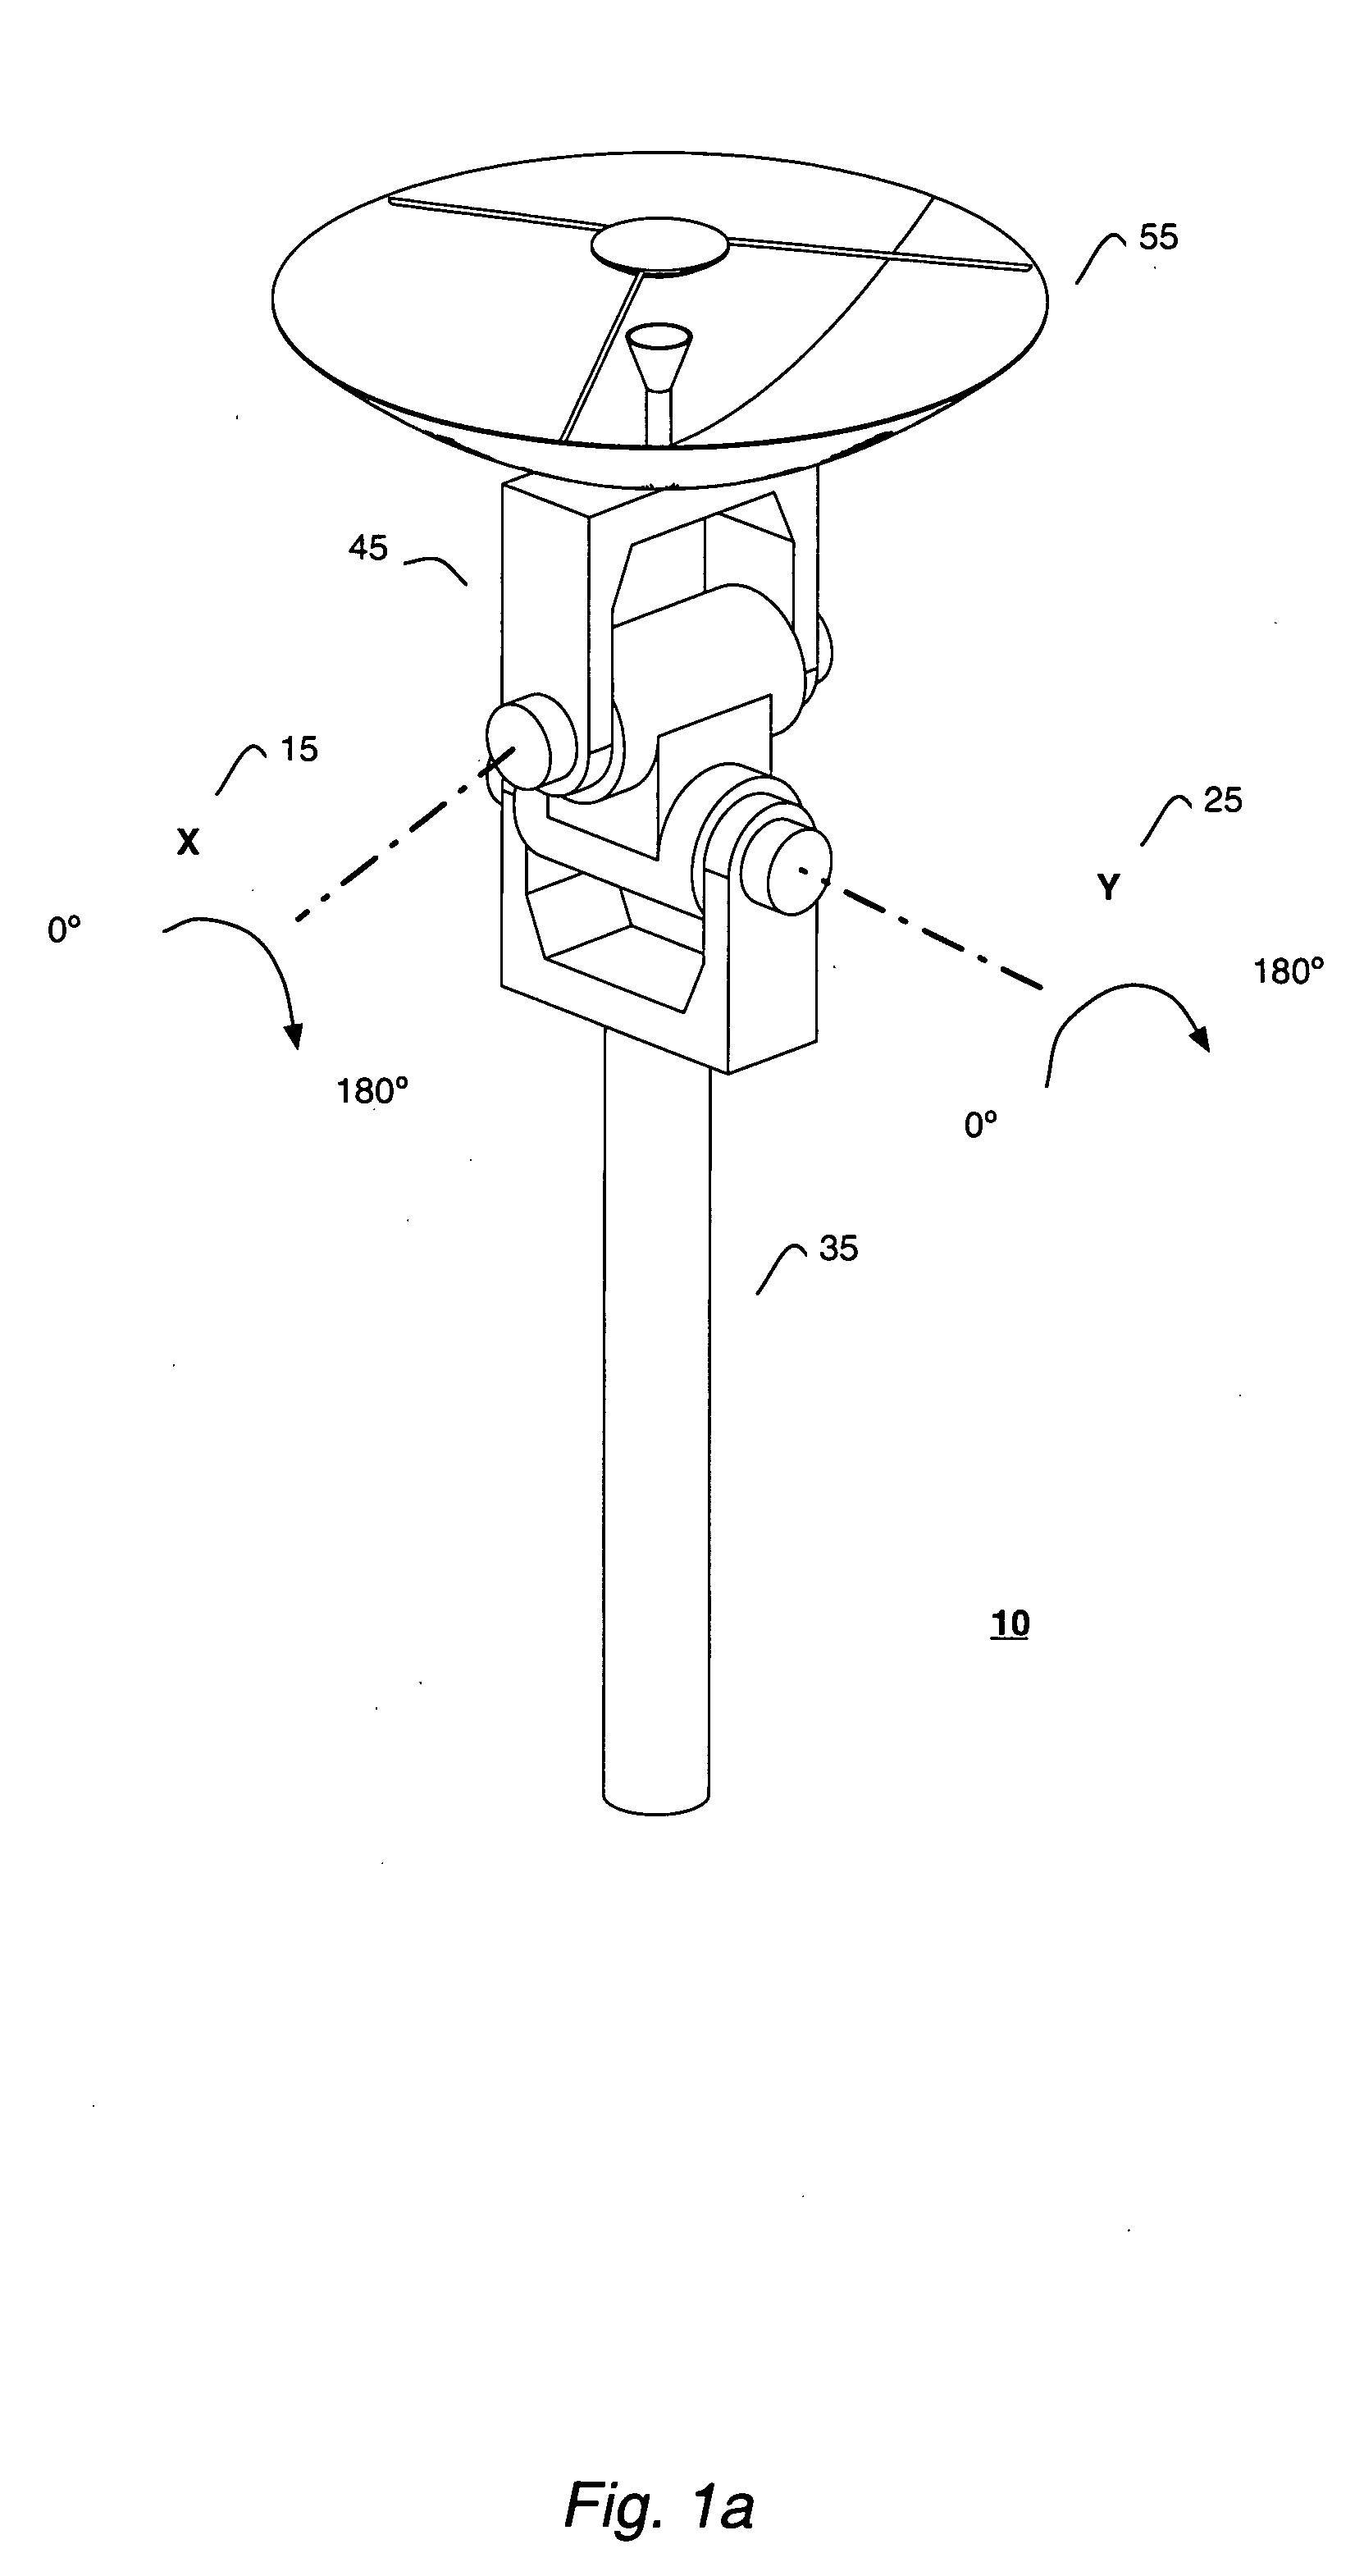 Method and apparatus for eliminating keyhole problems in an X-Y gimbal assembly